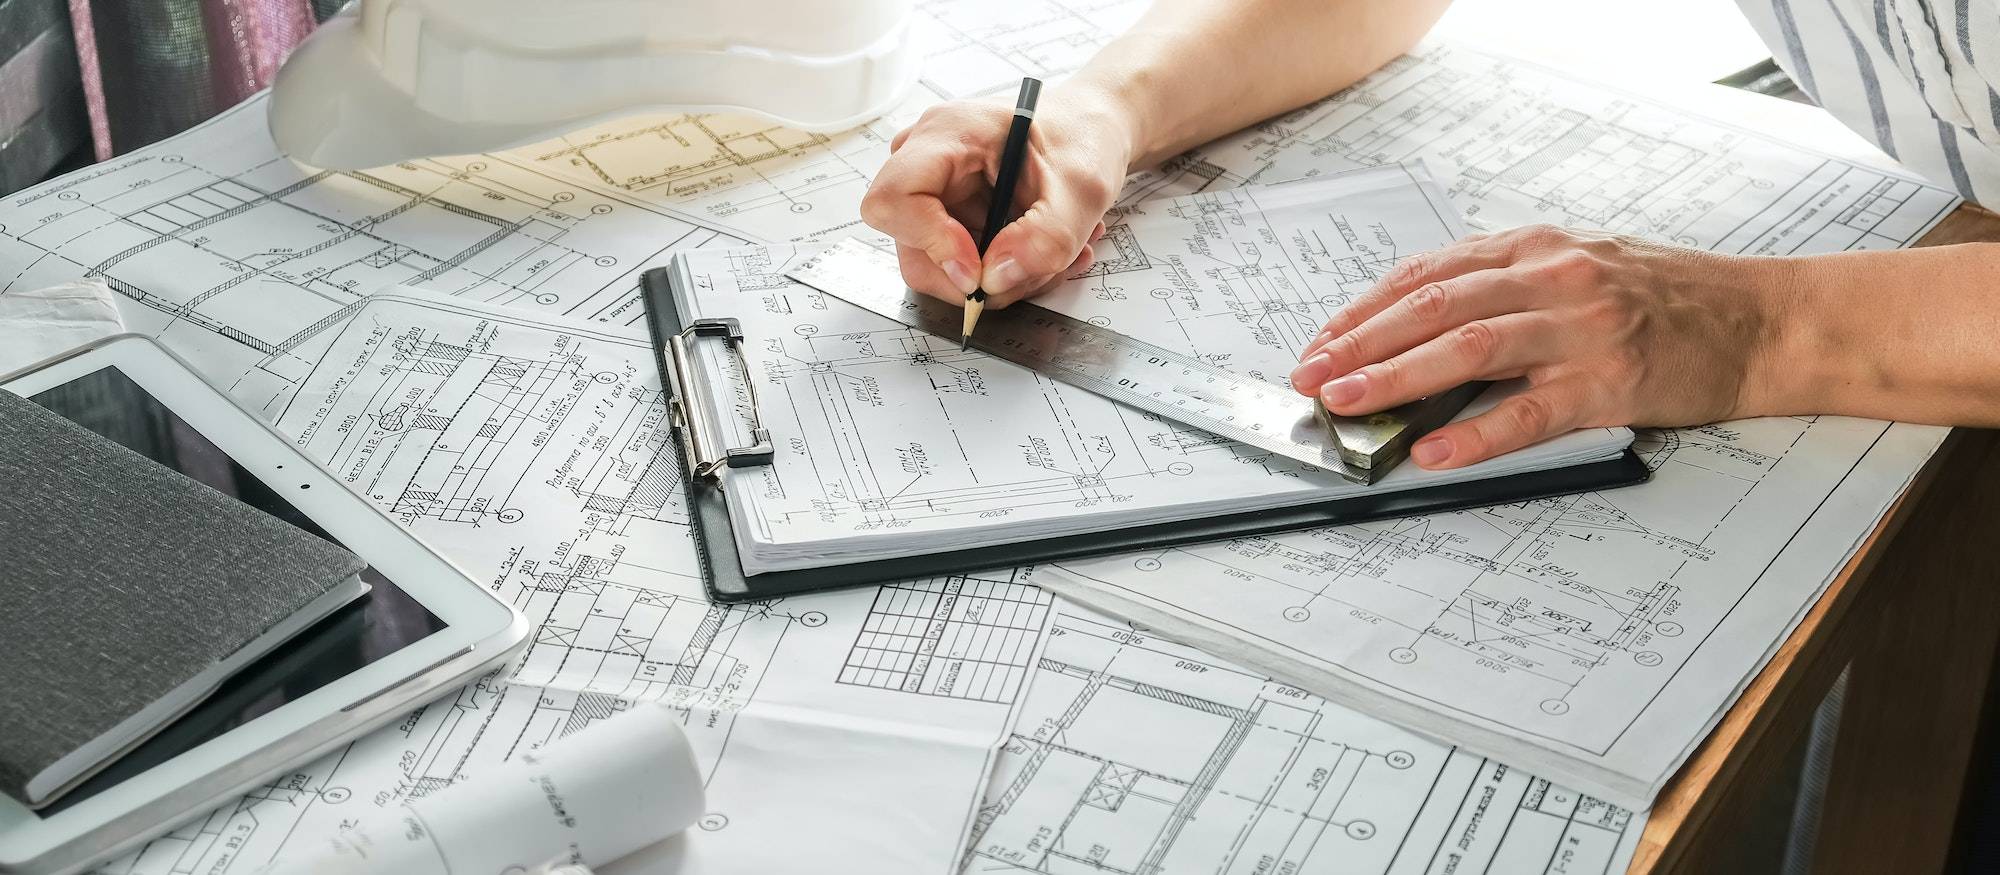 architect design working drawing sketch plans blueprints and making architectural